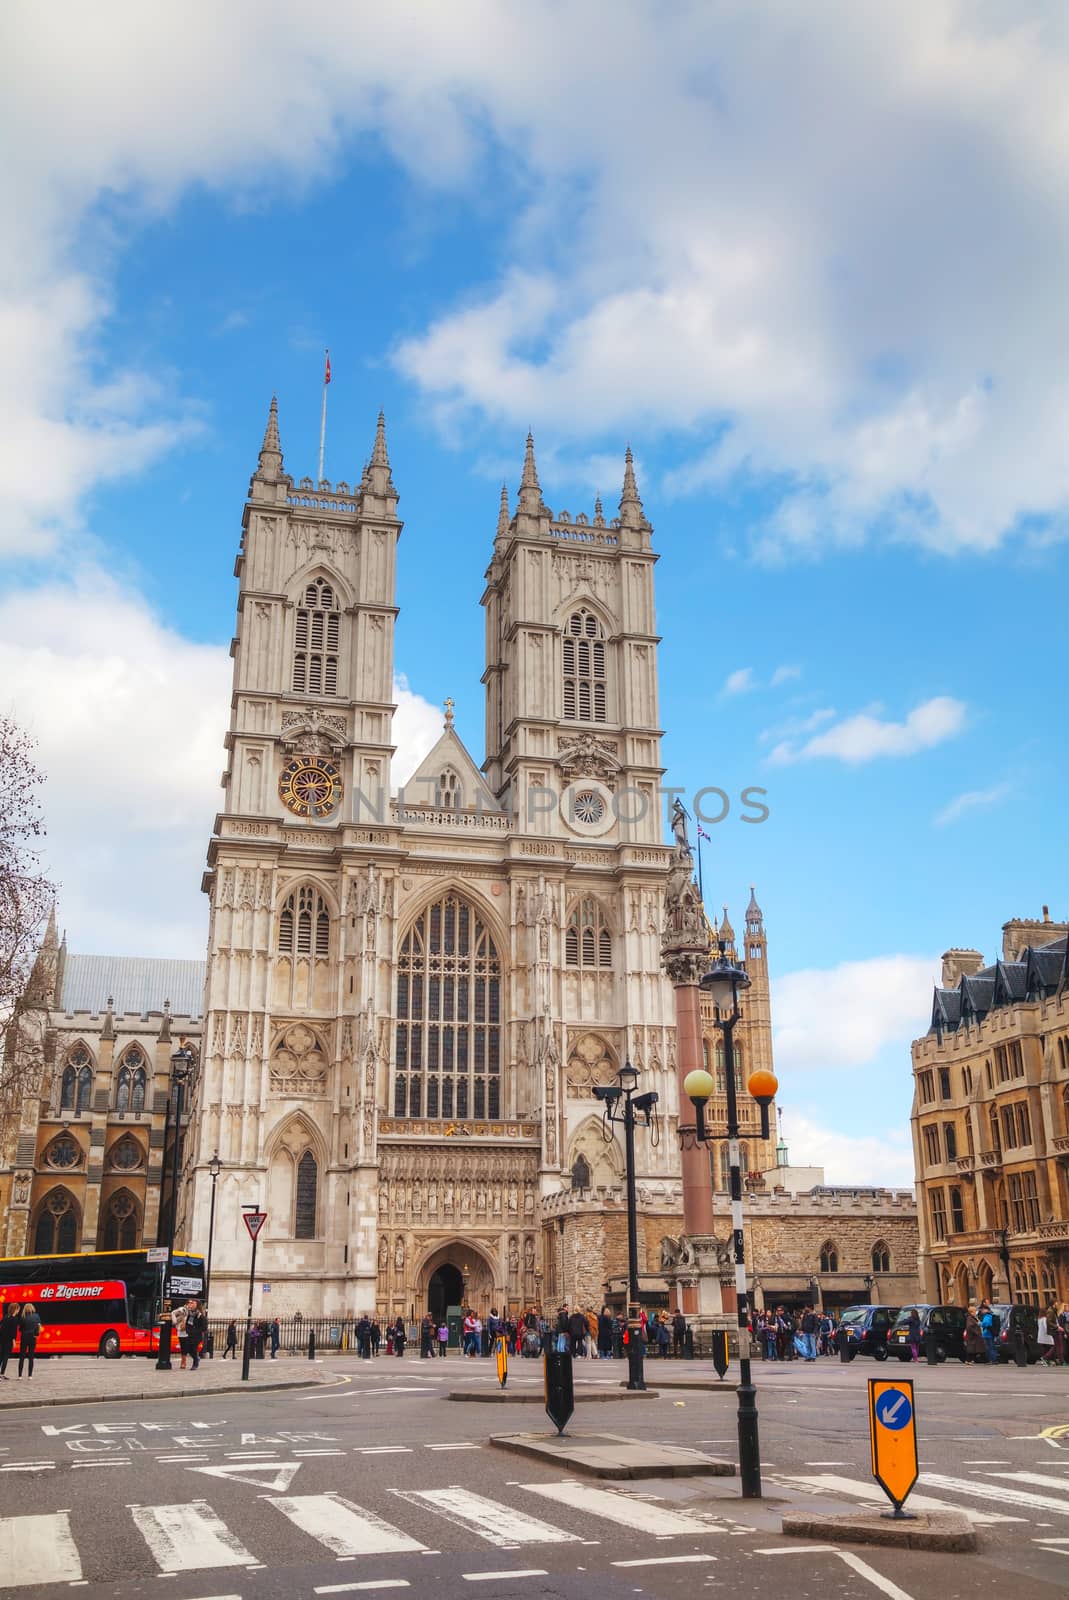 Westminster Abbey church in London by AndreyKr